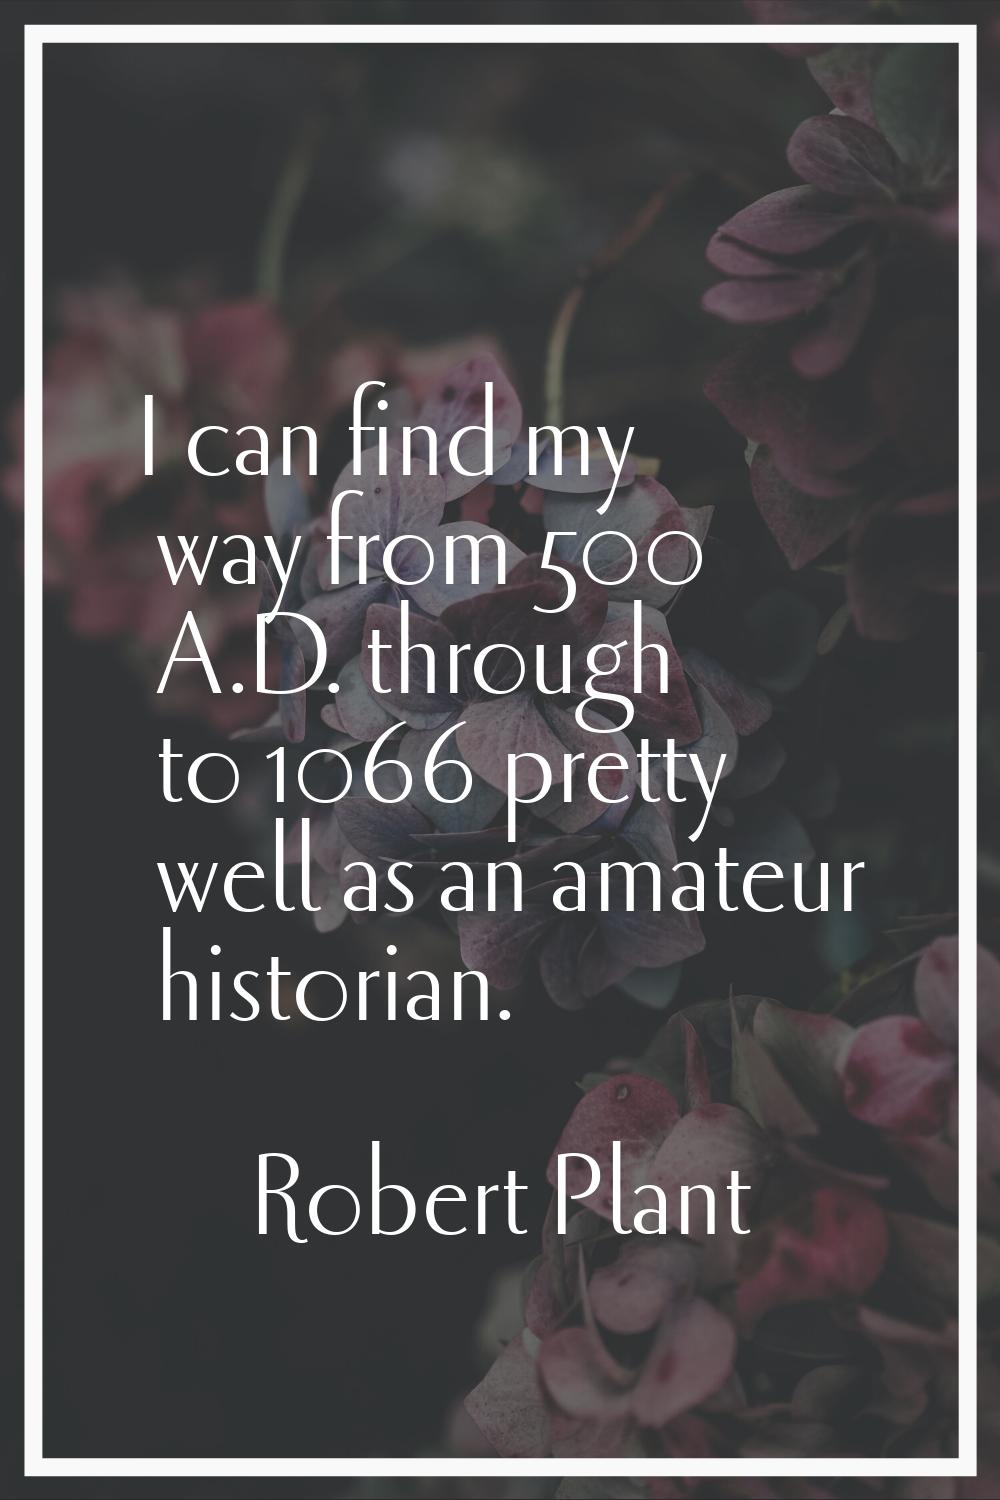 I can find my way from 500 A.D. through to 1066 pretty well as an amateur historian.